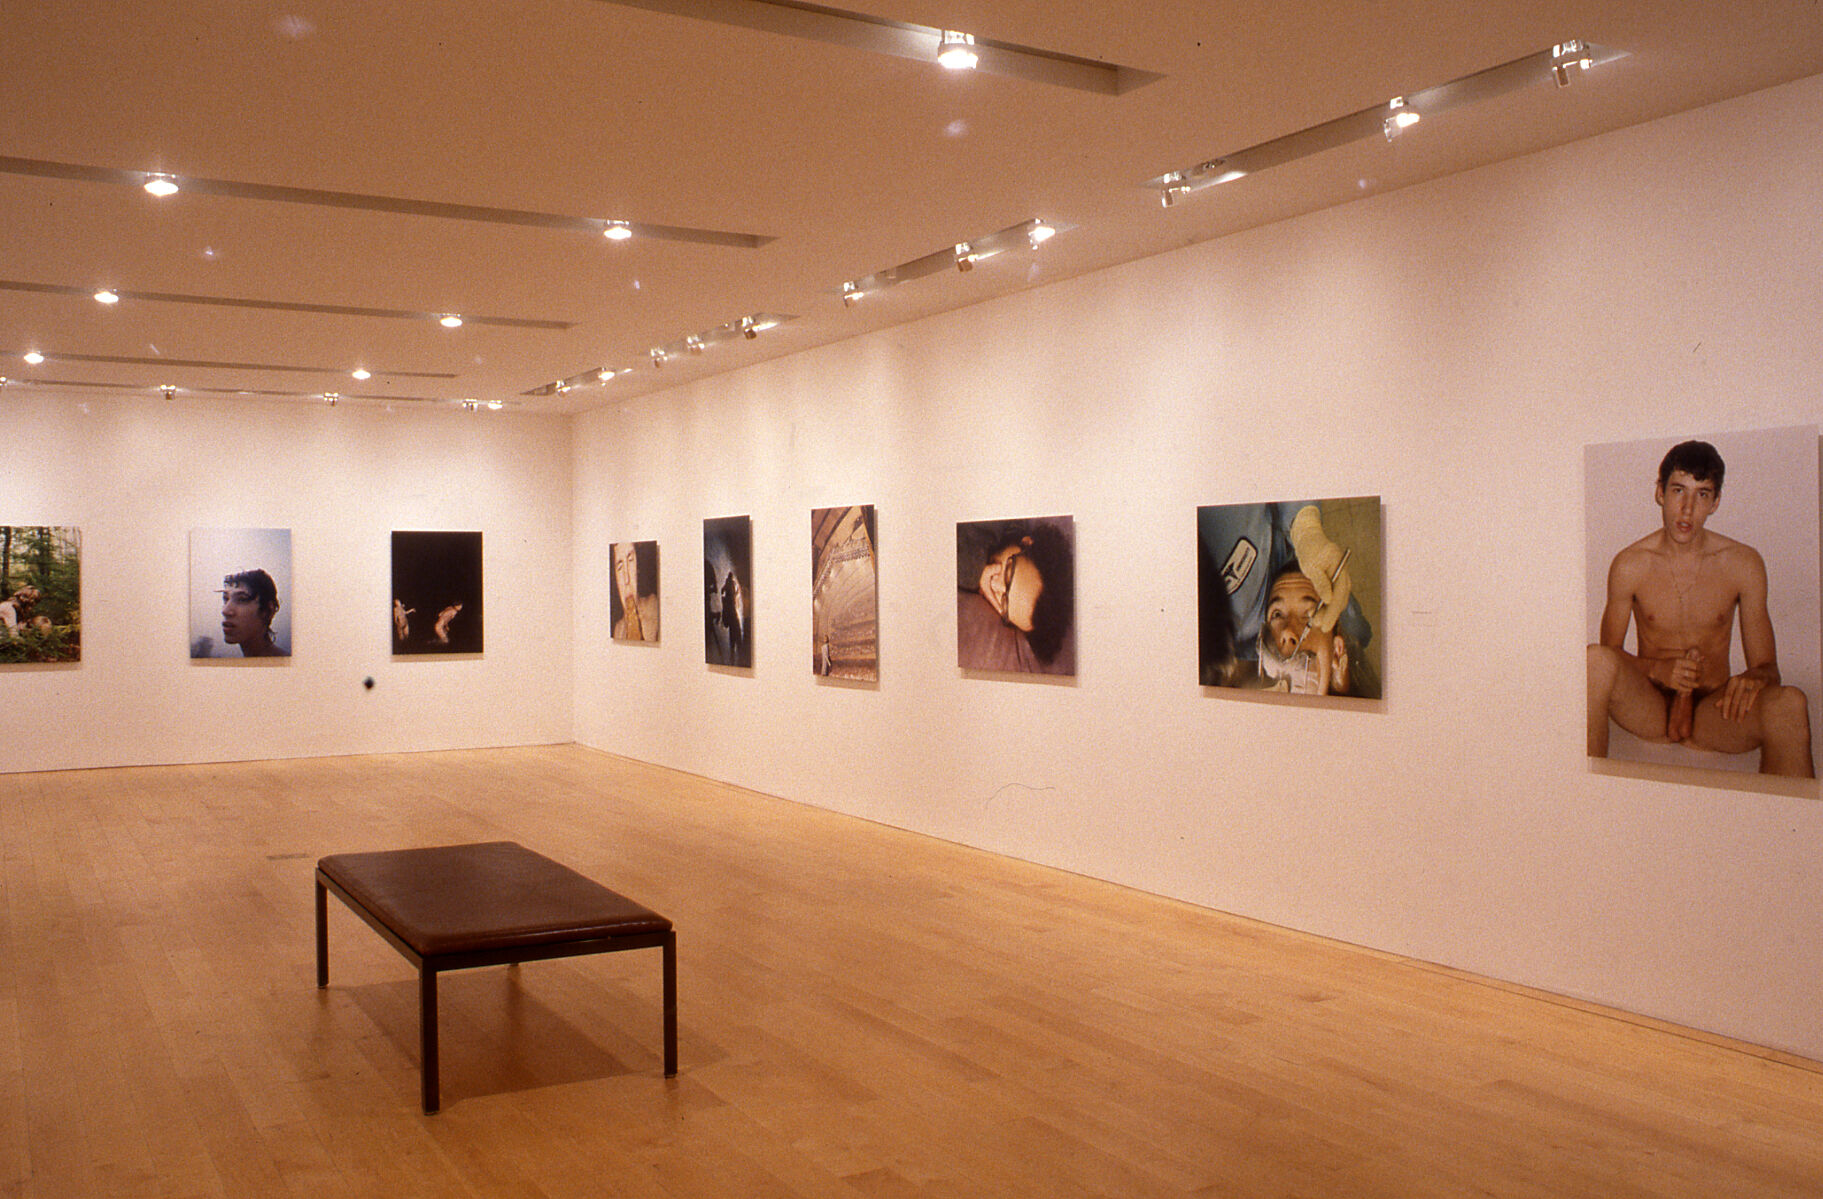 A gallery filled with photographs displayed on the walls.